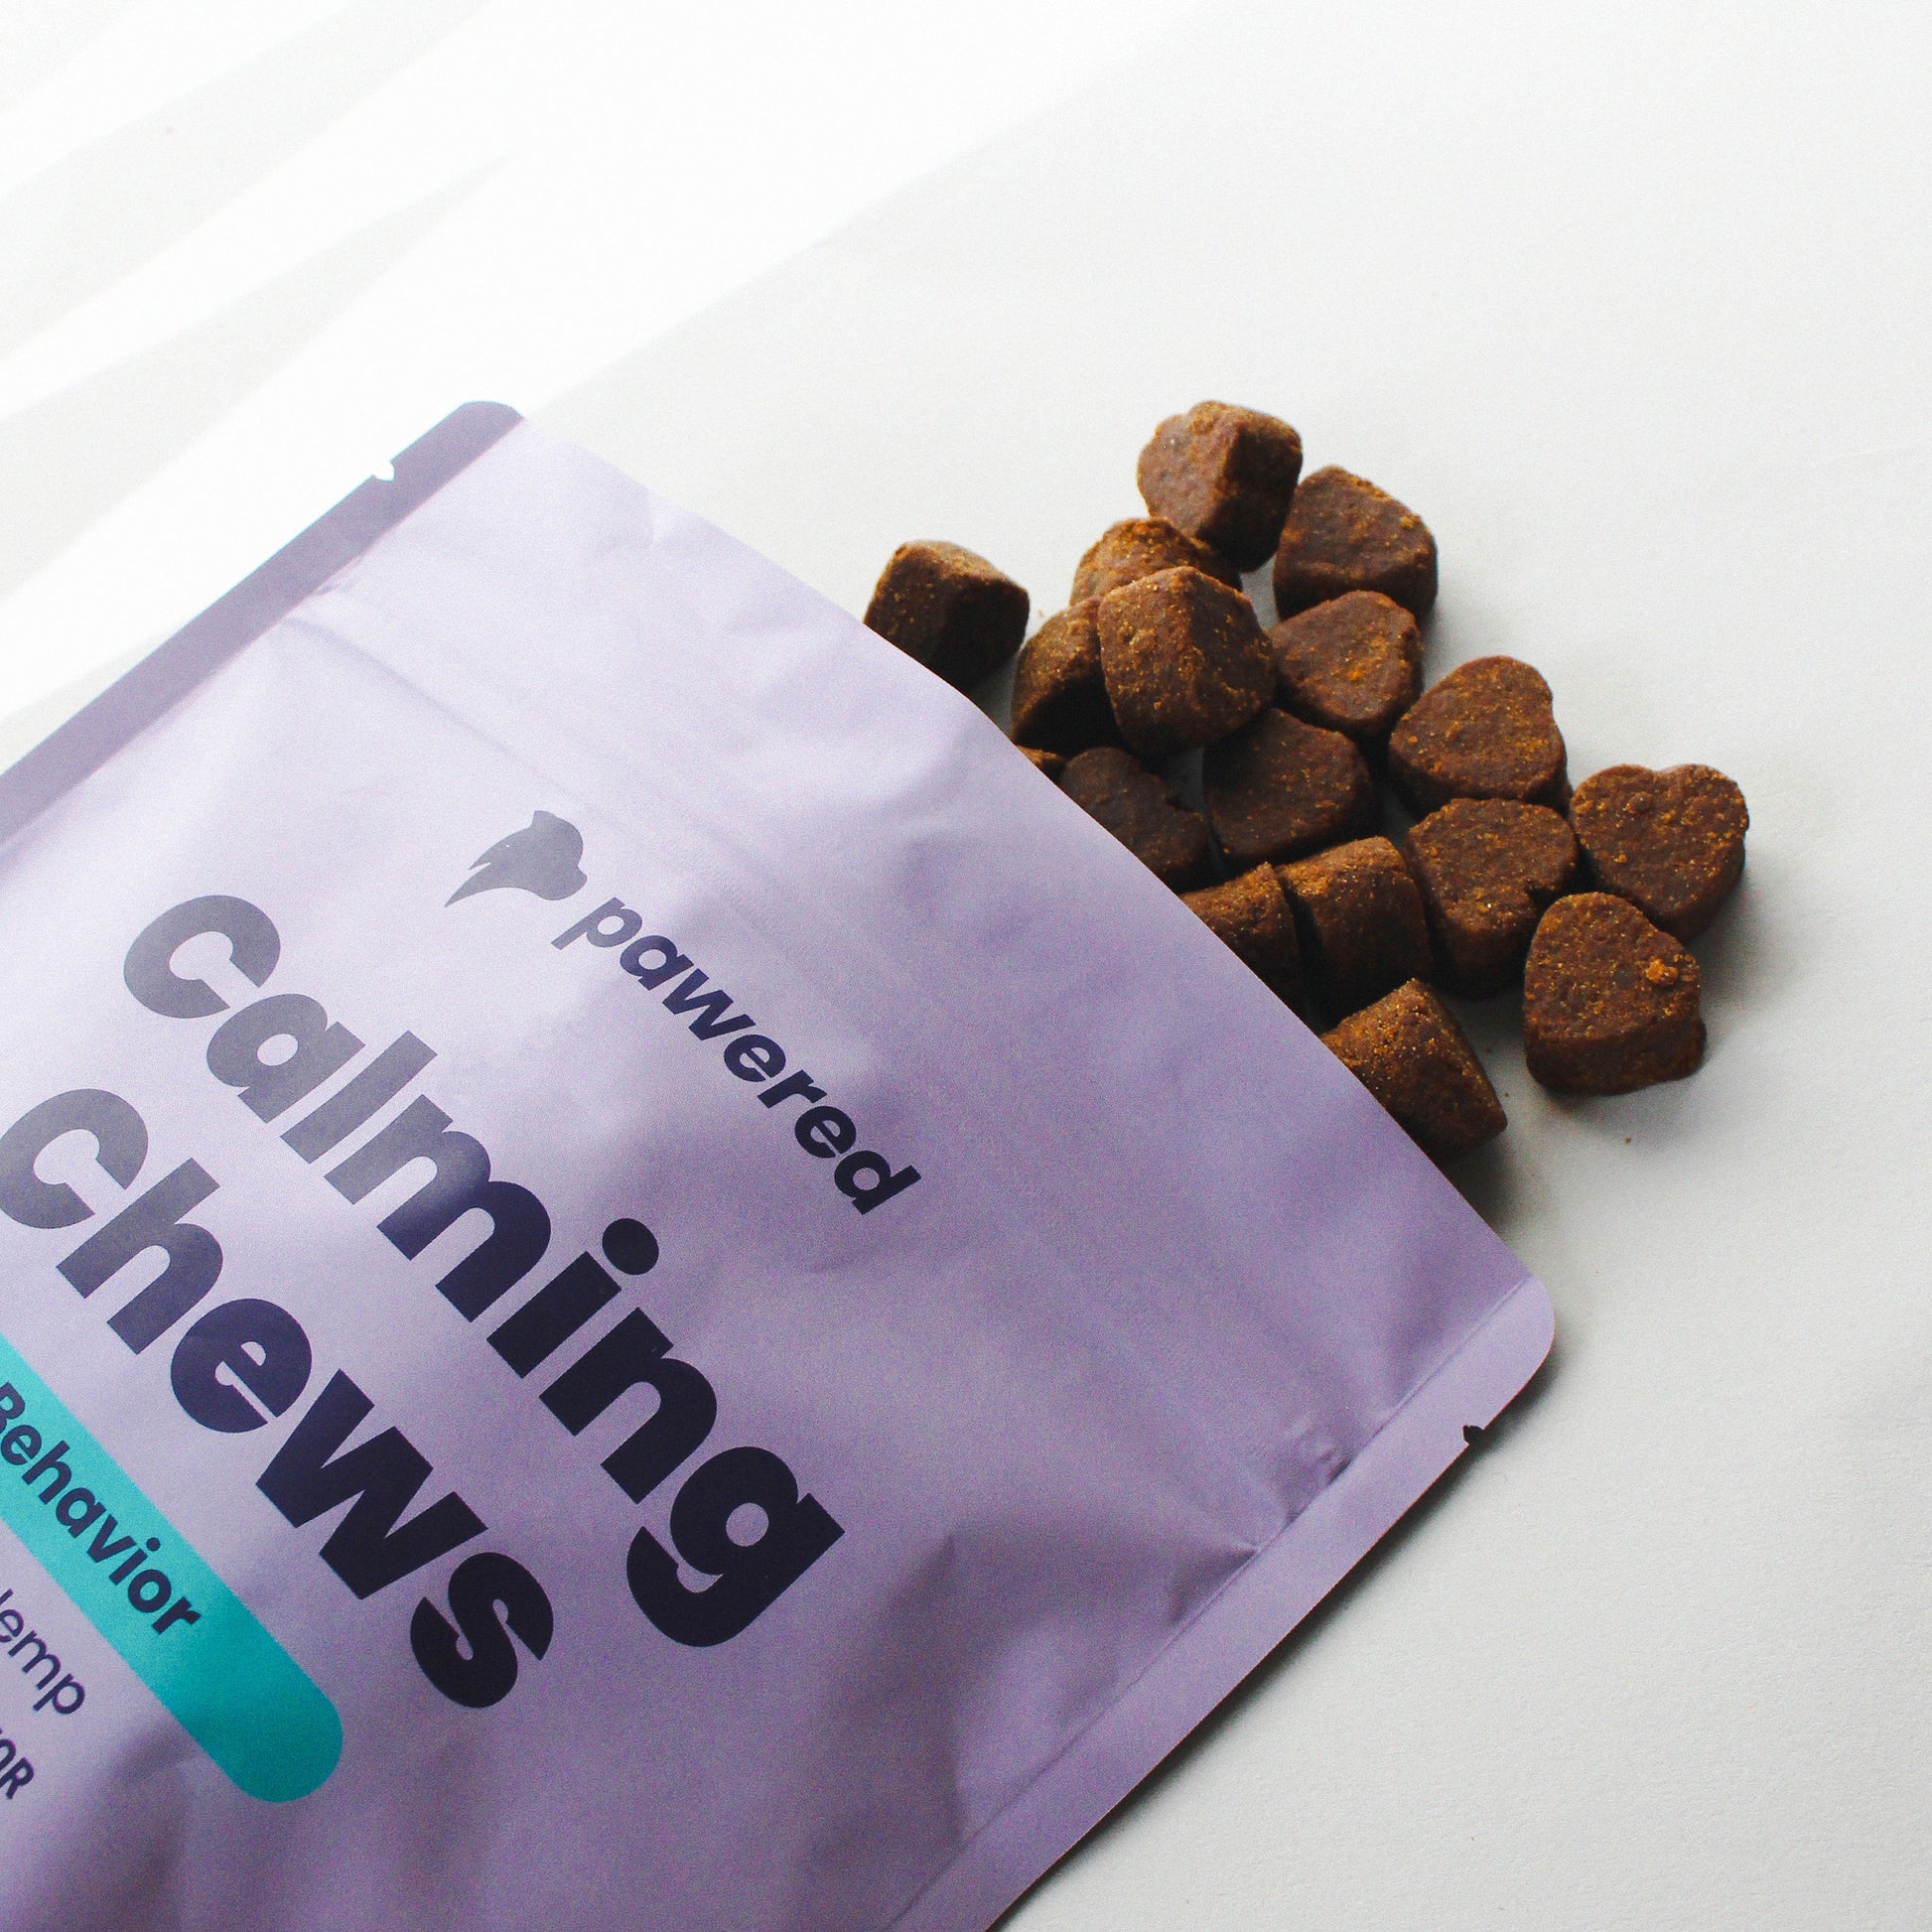 calming dog chews, natural ingredients, hemp for dogs, valerian root for dogs, melatonin for dogs, organic chamomile for dogs